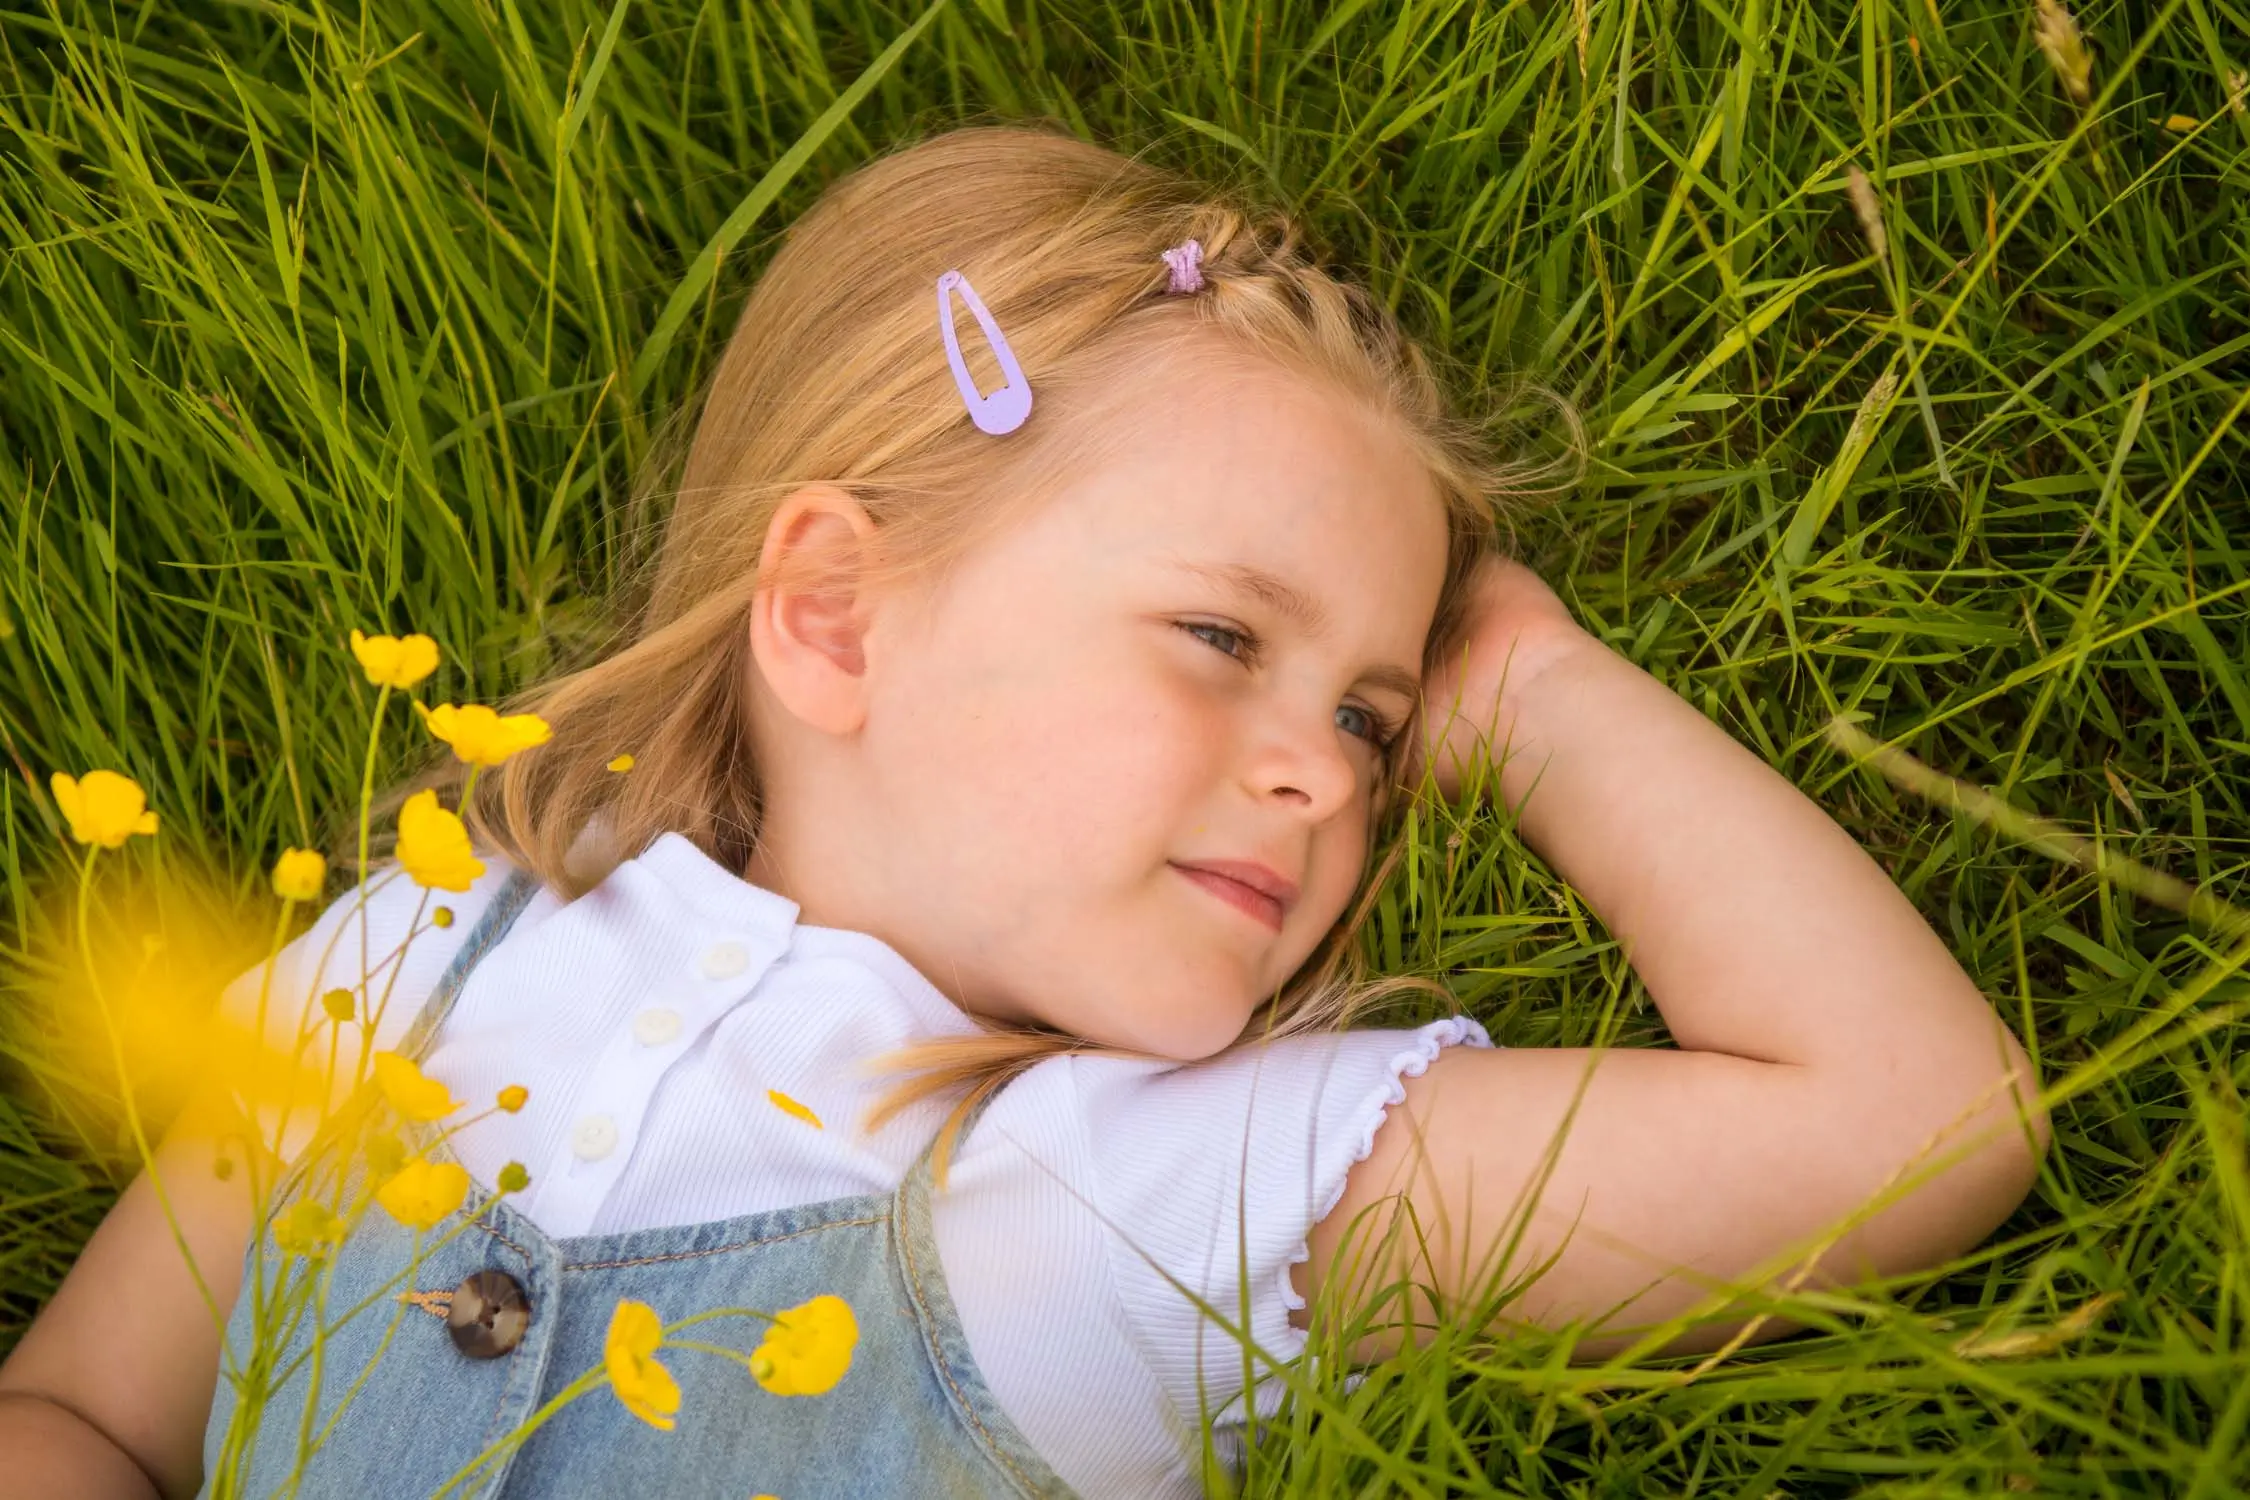 A young girl lying in the grass with wildflowers